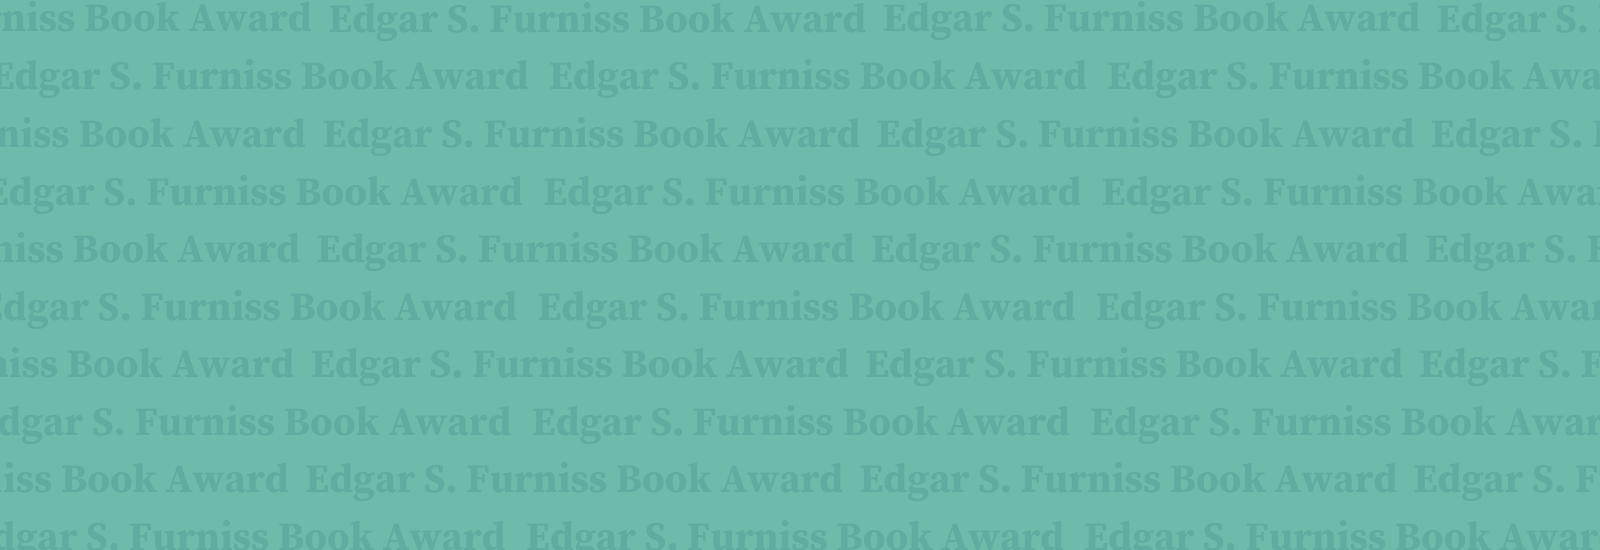 Edgar S. Furniss Book Award repeating on a teal background